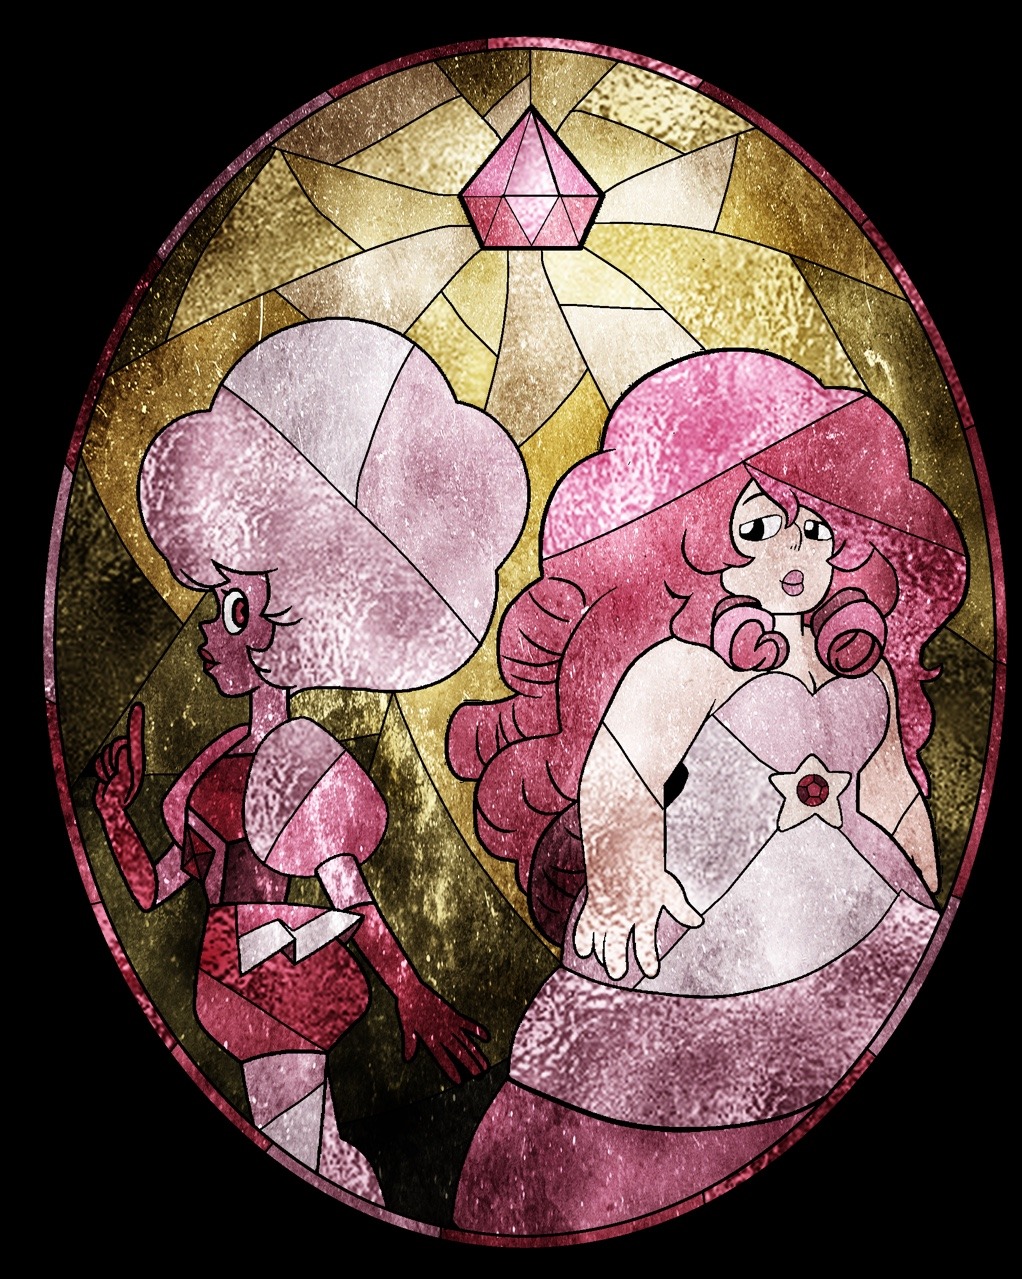 Made some more stained glass art!